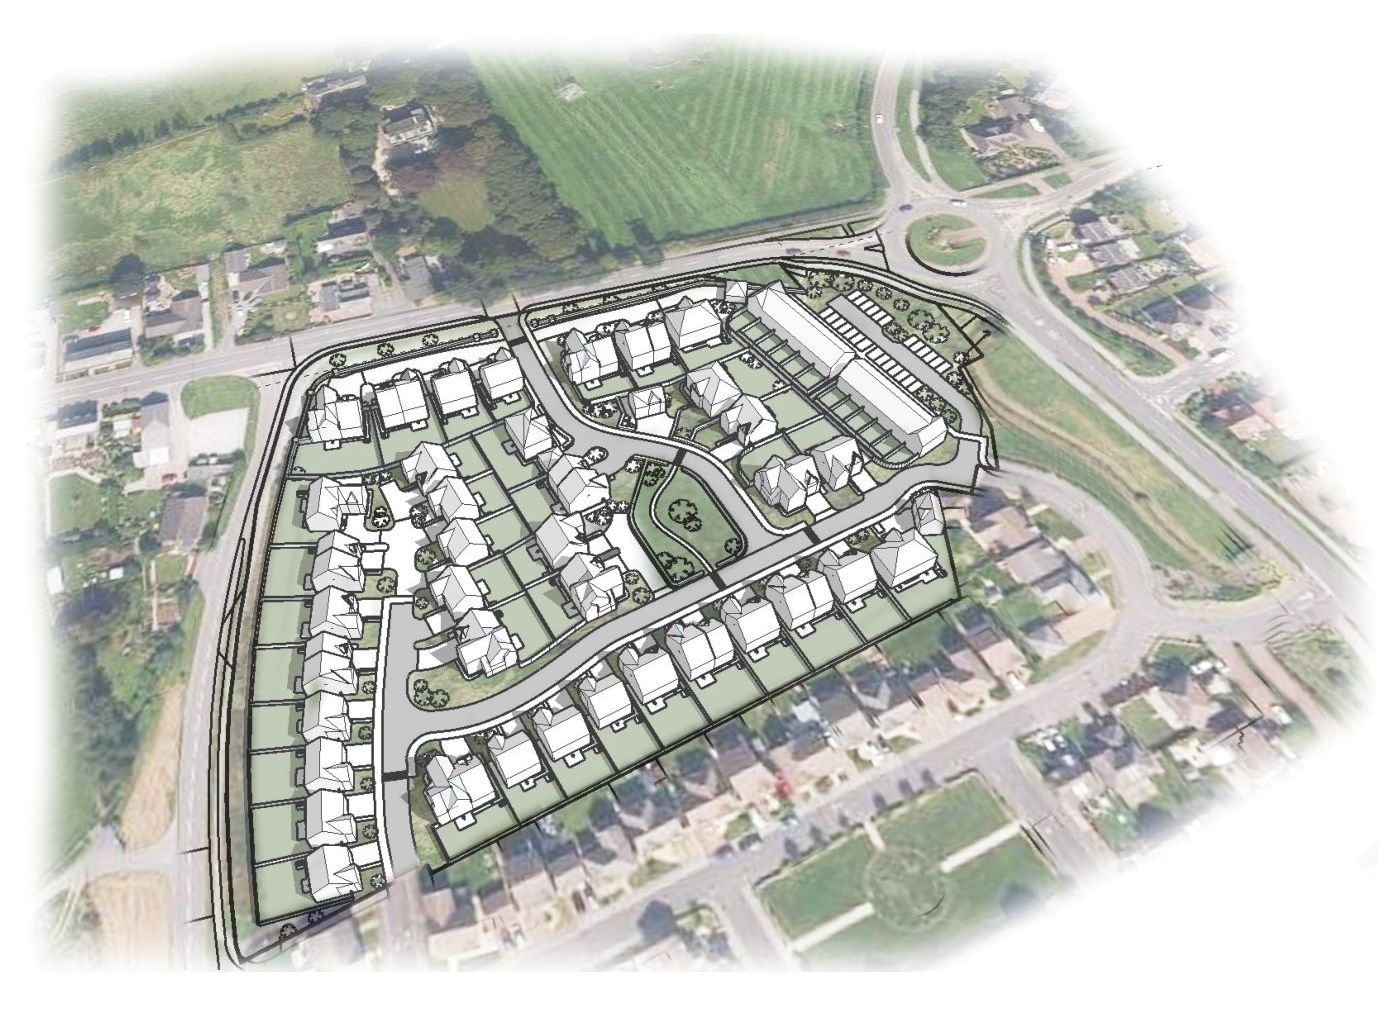 New Cala development approved in Westhill